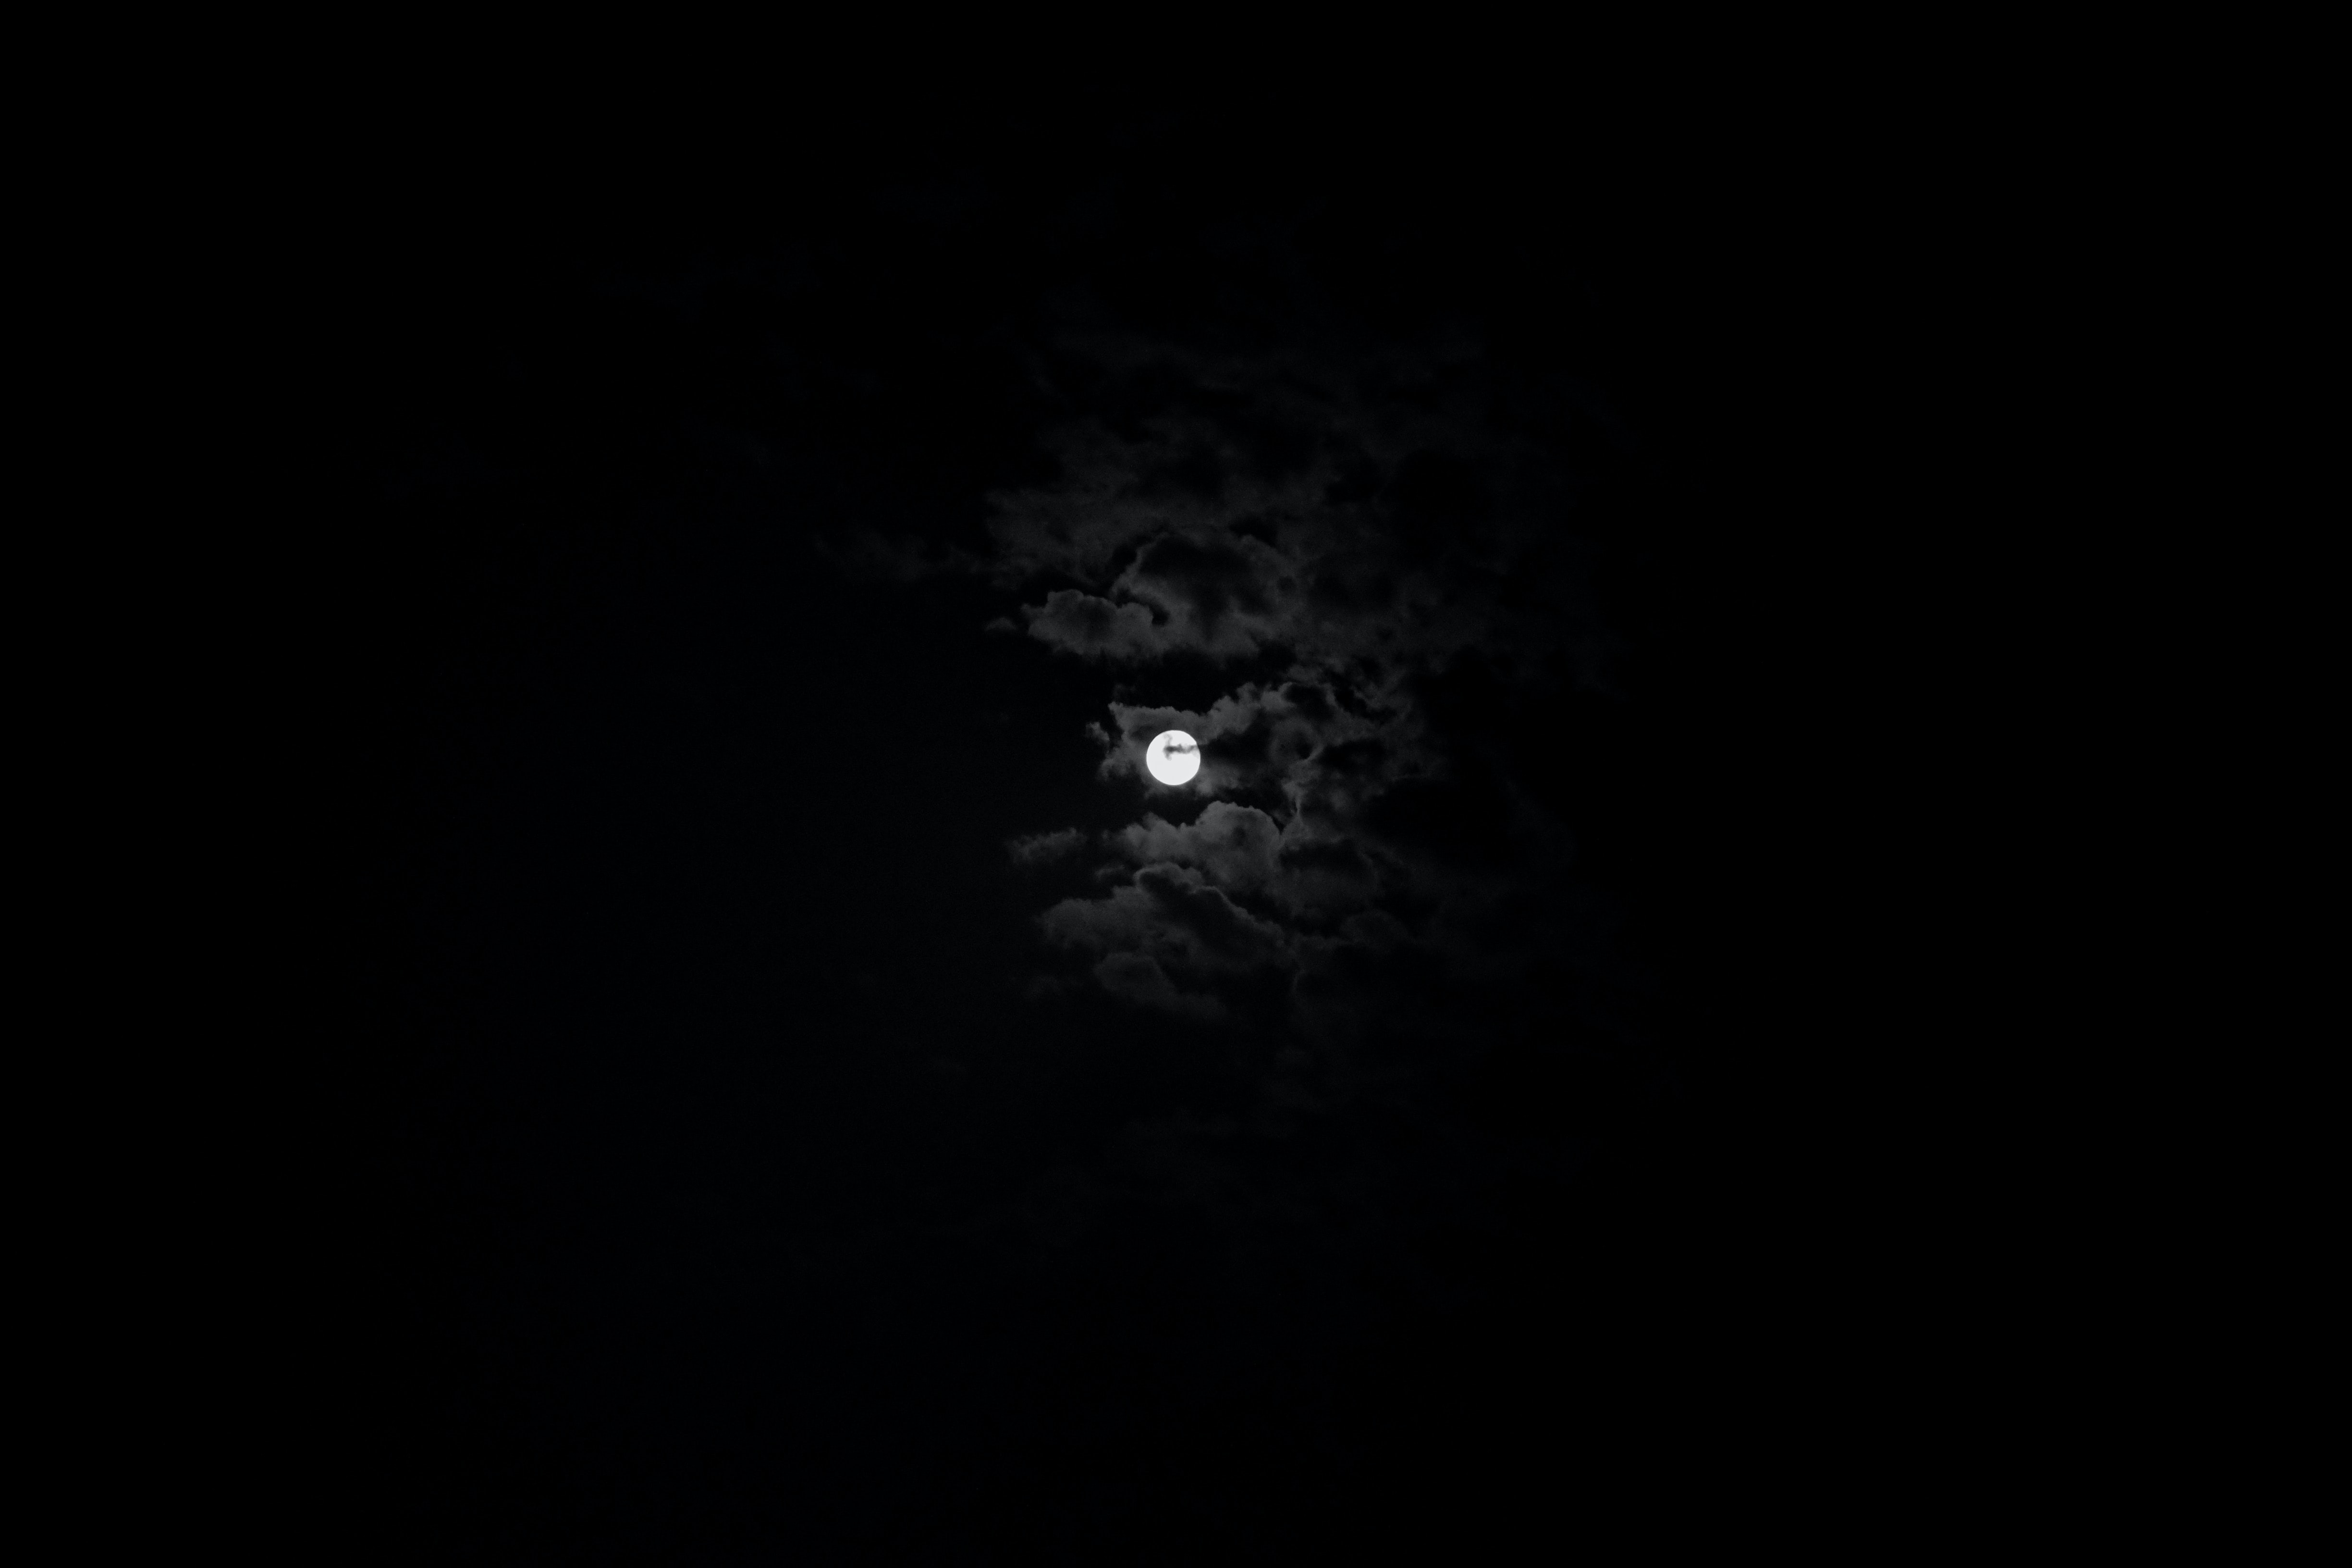 moon, black, black and white, sky, night, clouds Aesthetic wallpaper